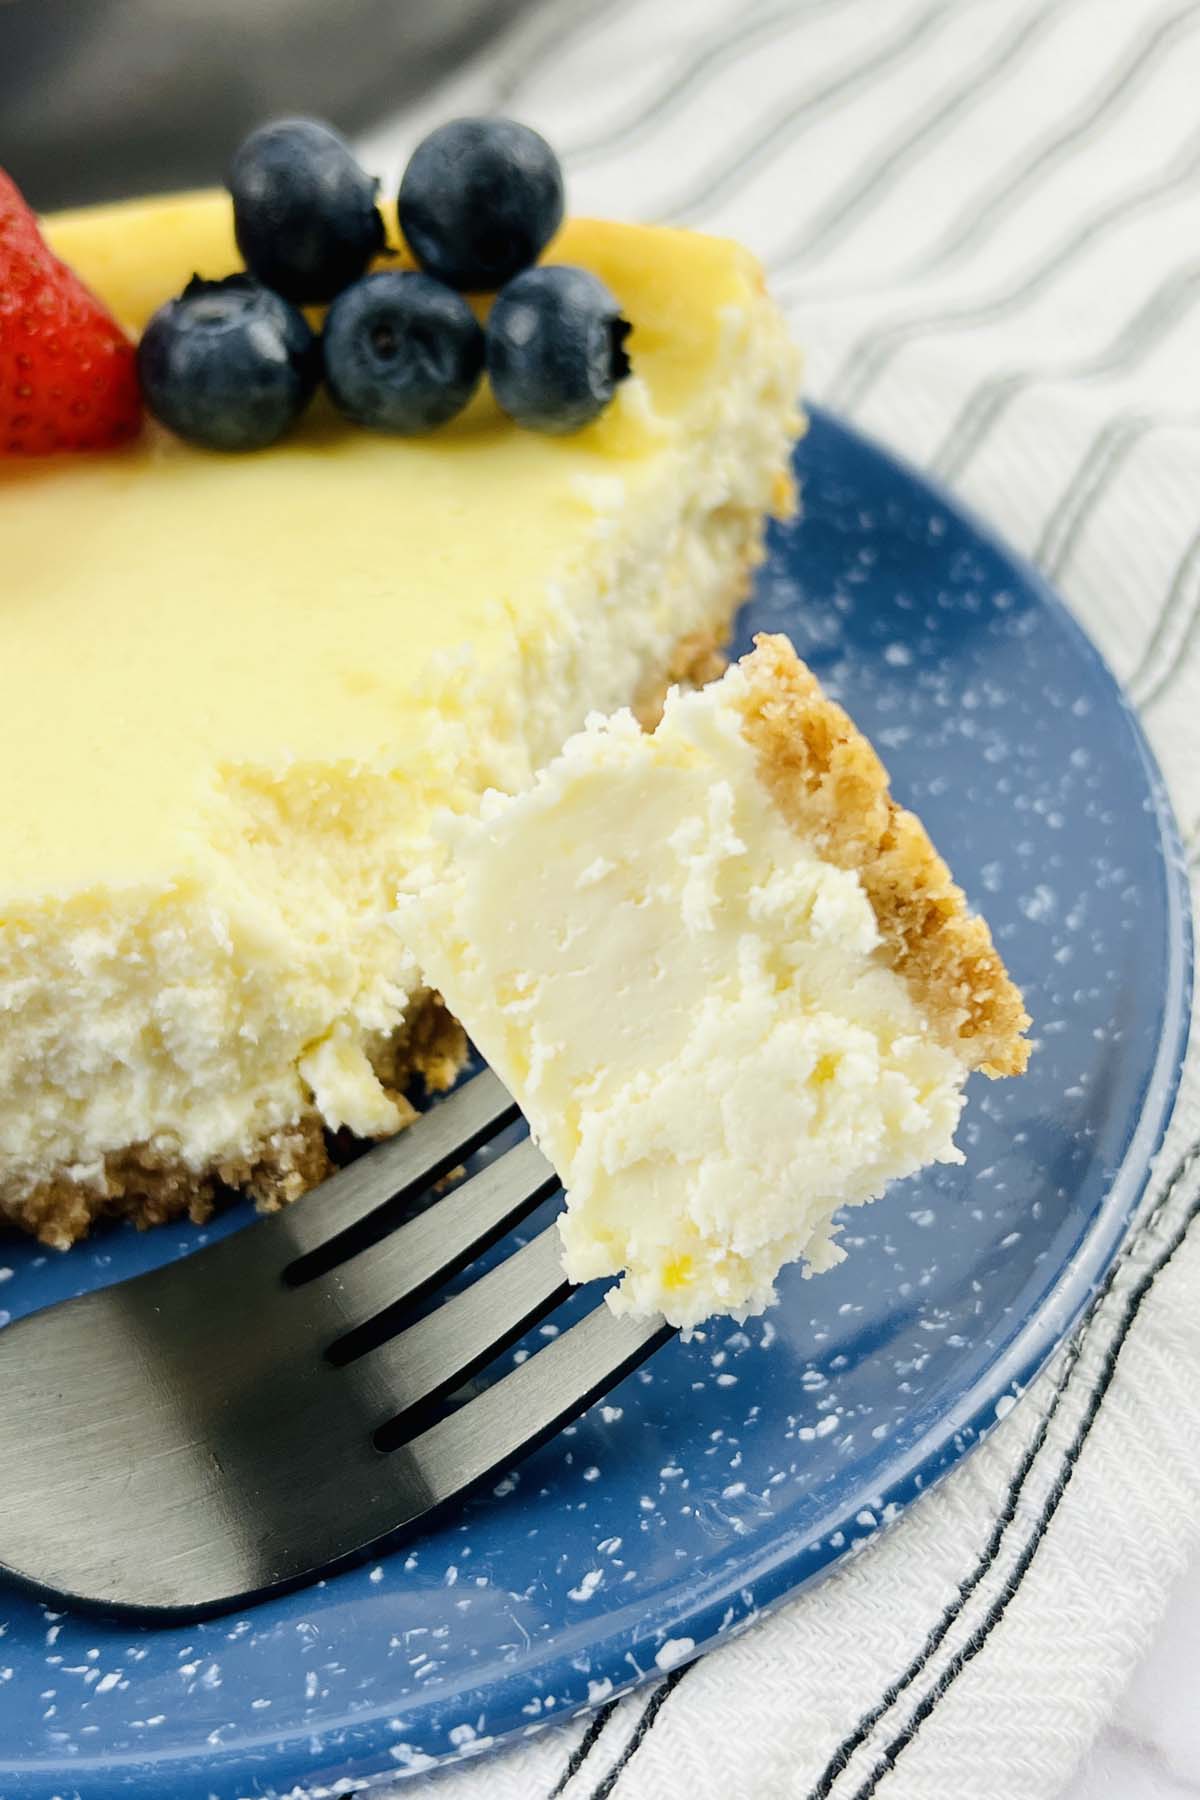 A piece of cheesecake on a fork.